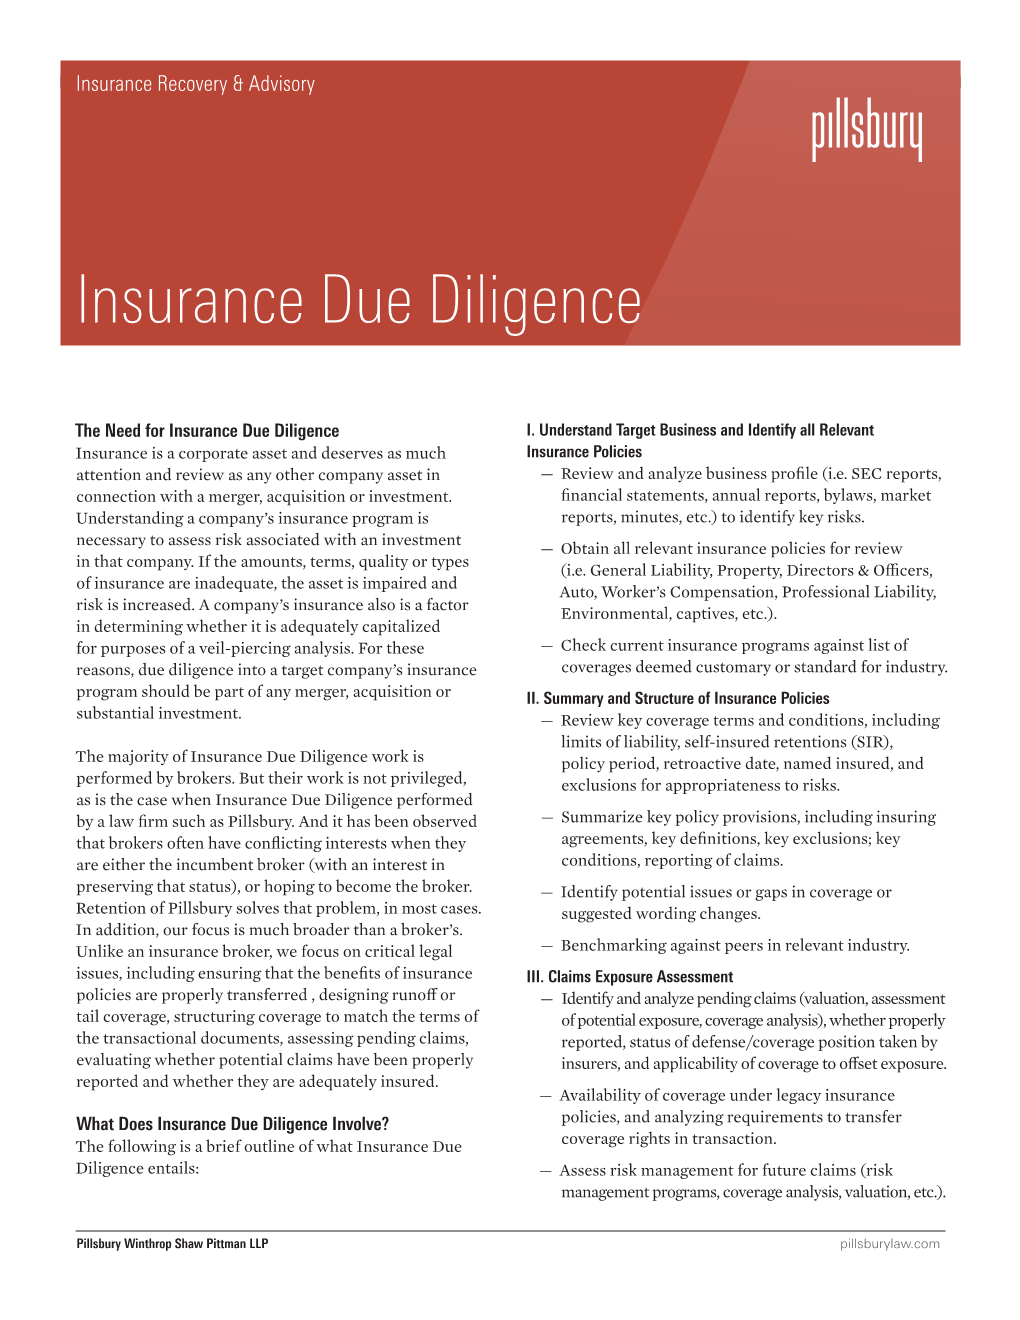 Insurance Due Diligence